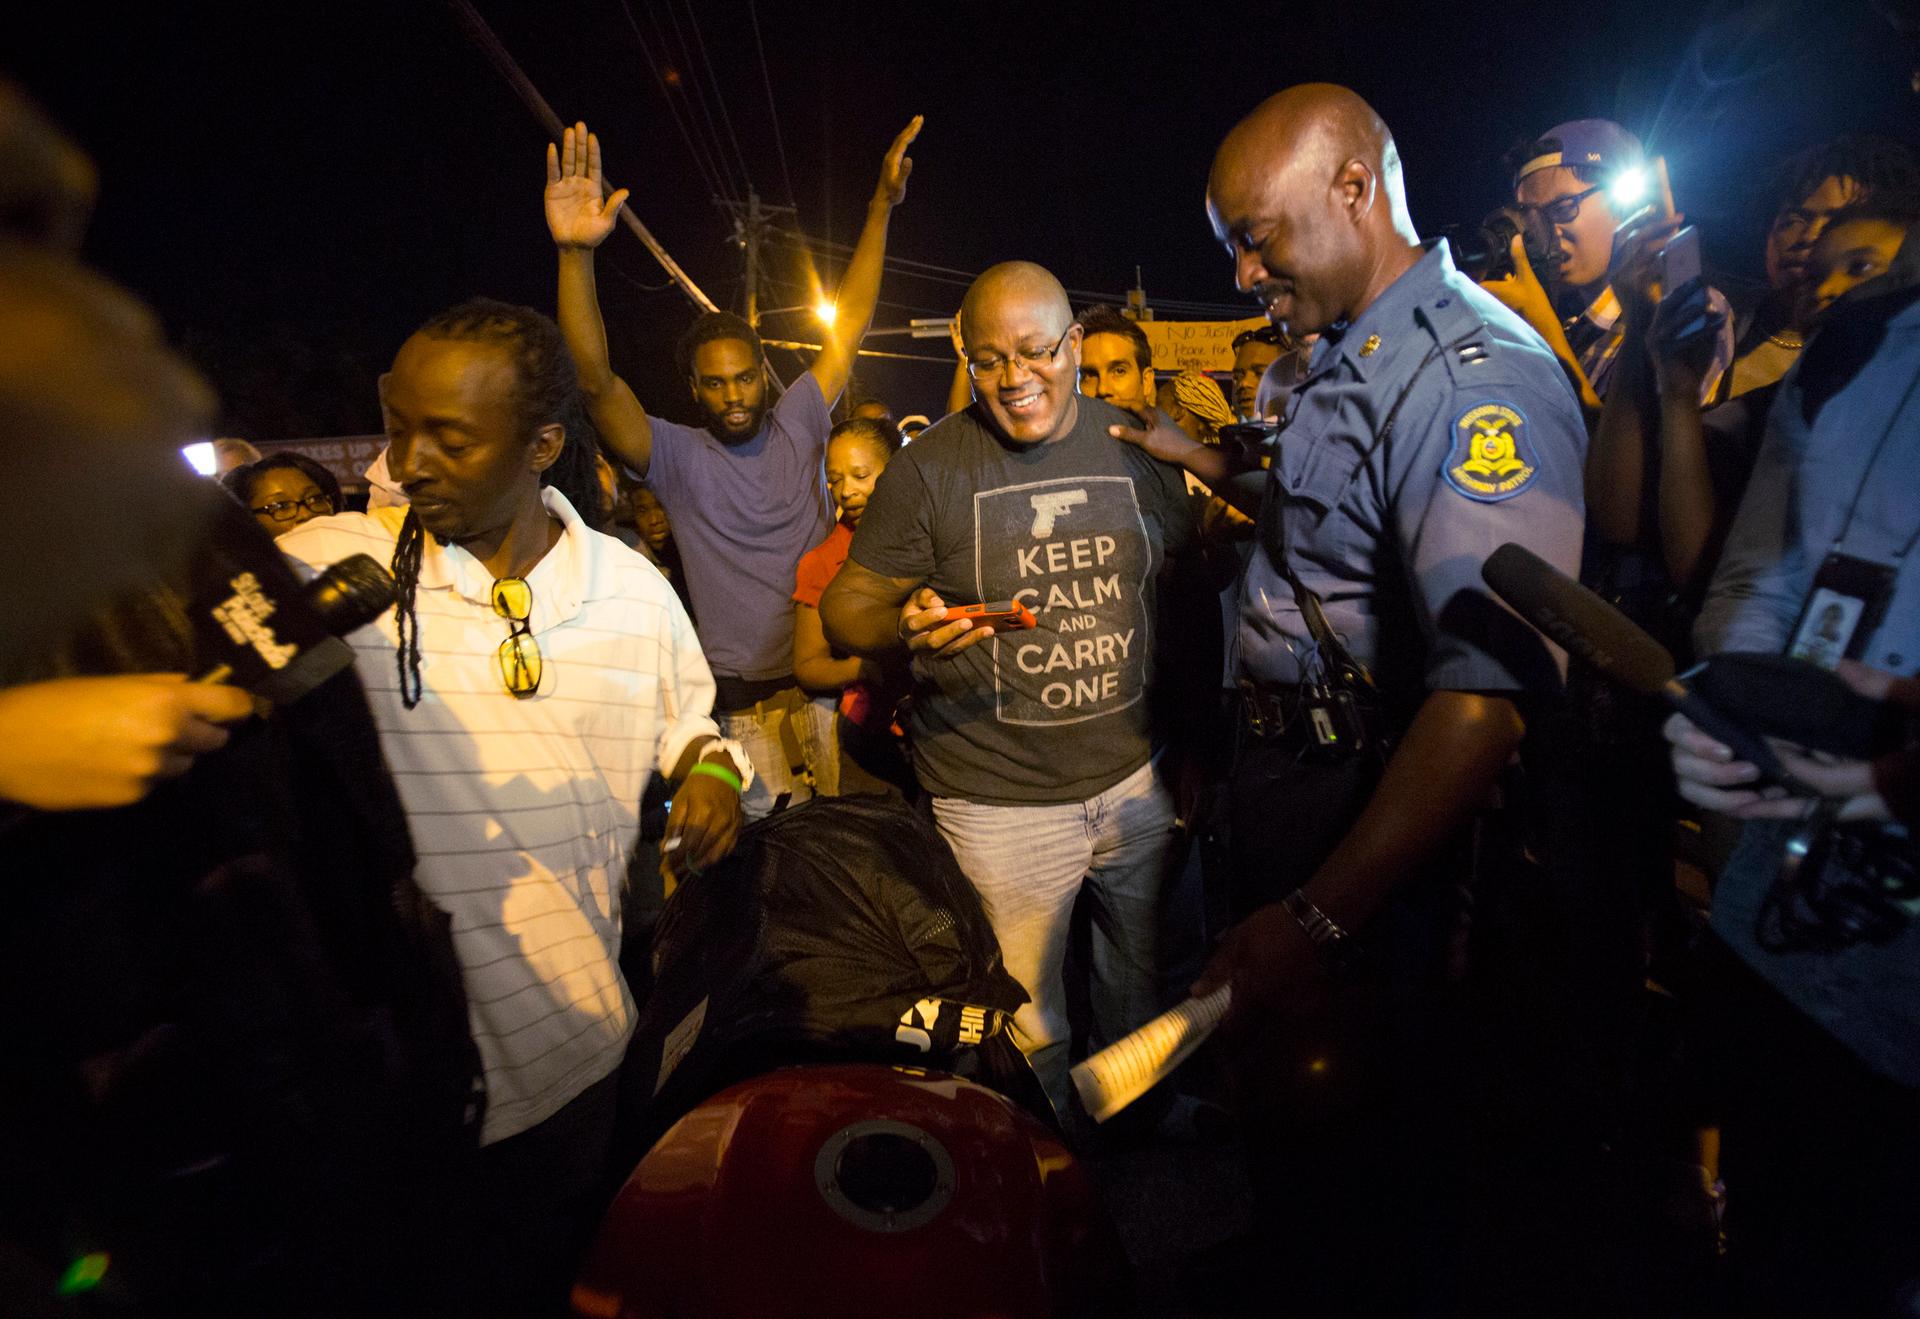 Highway Patrol Captain Ron Johnson talks to people during a peaceful demonstration, as communities react to the shooting of Michael Brown in Ferguson, Missouri, on August 14, 2014. Tensions in Ferguson eased after the Highway Patrol relieved St. Louis Cou